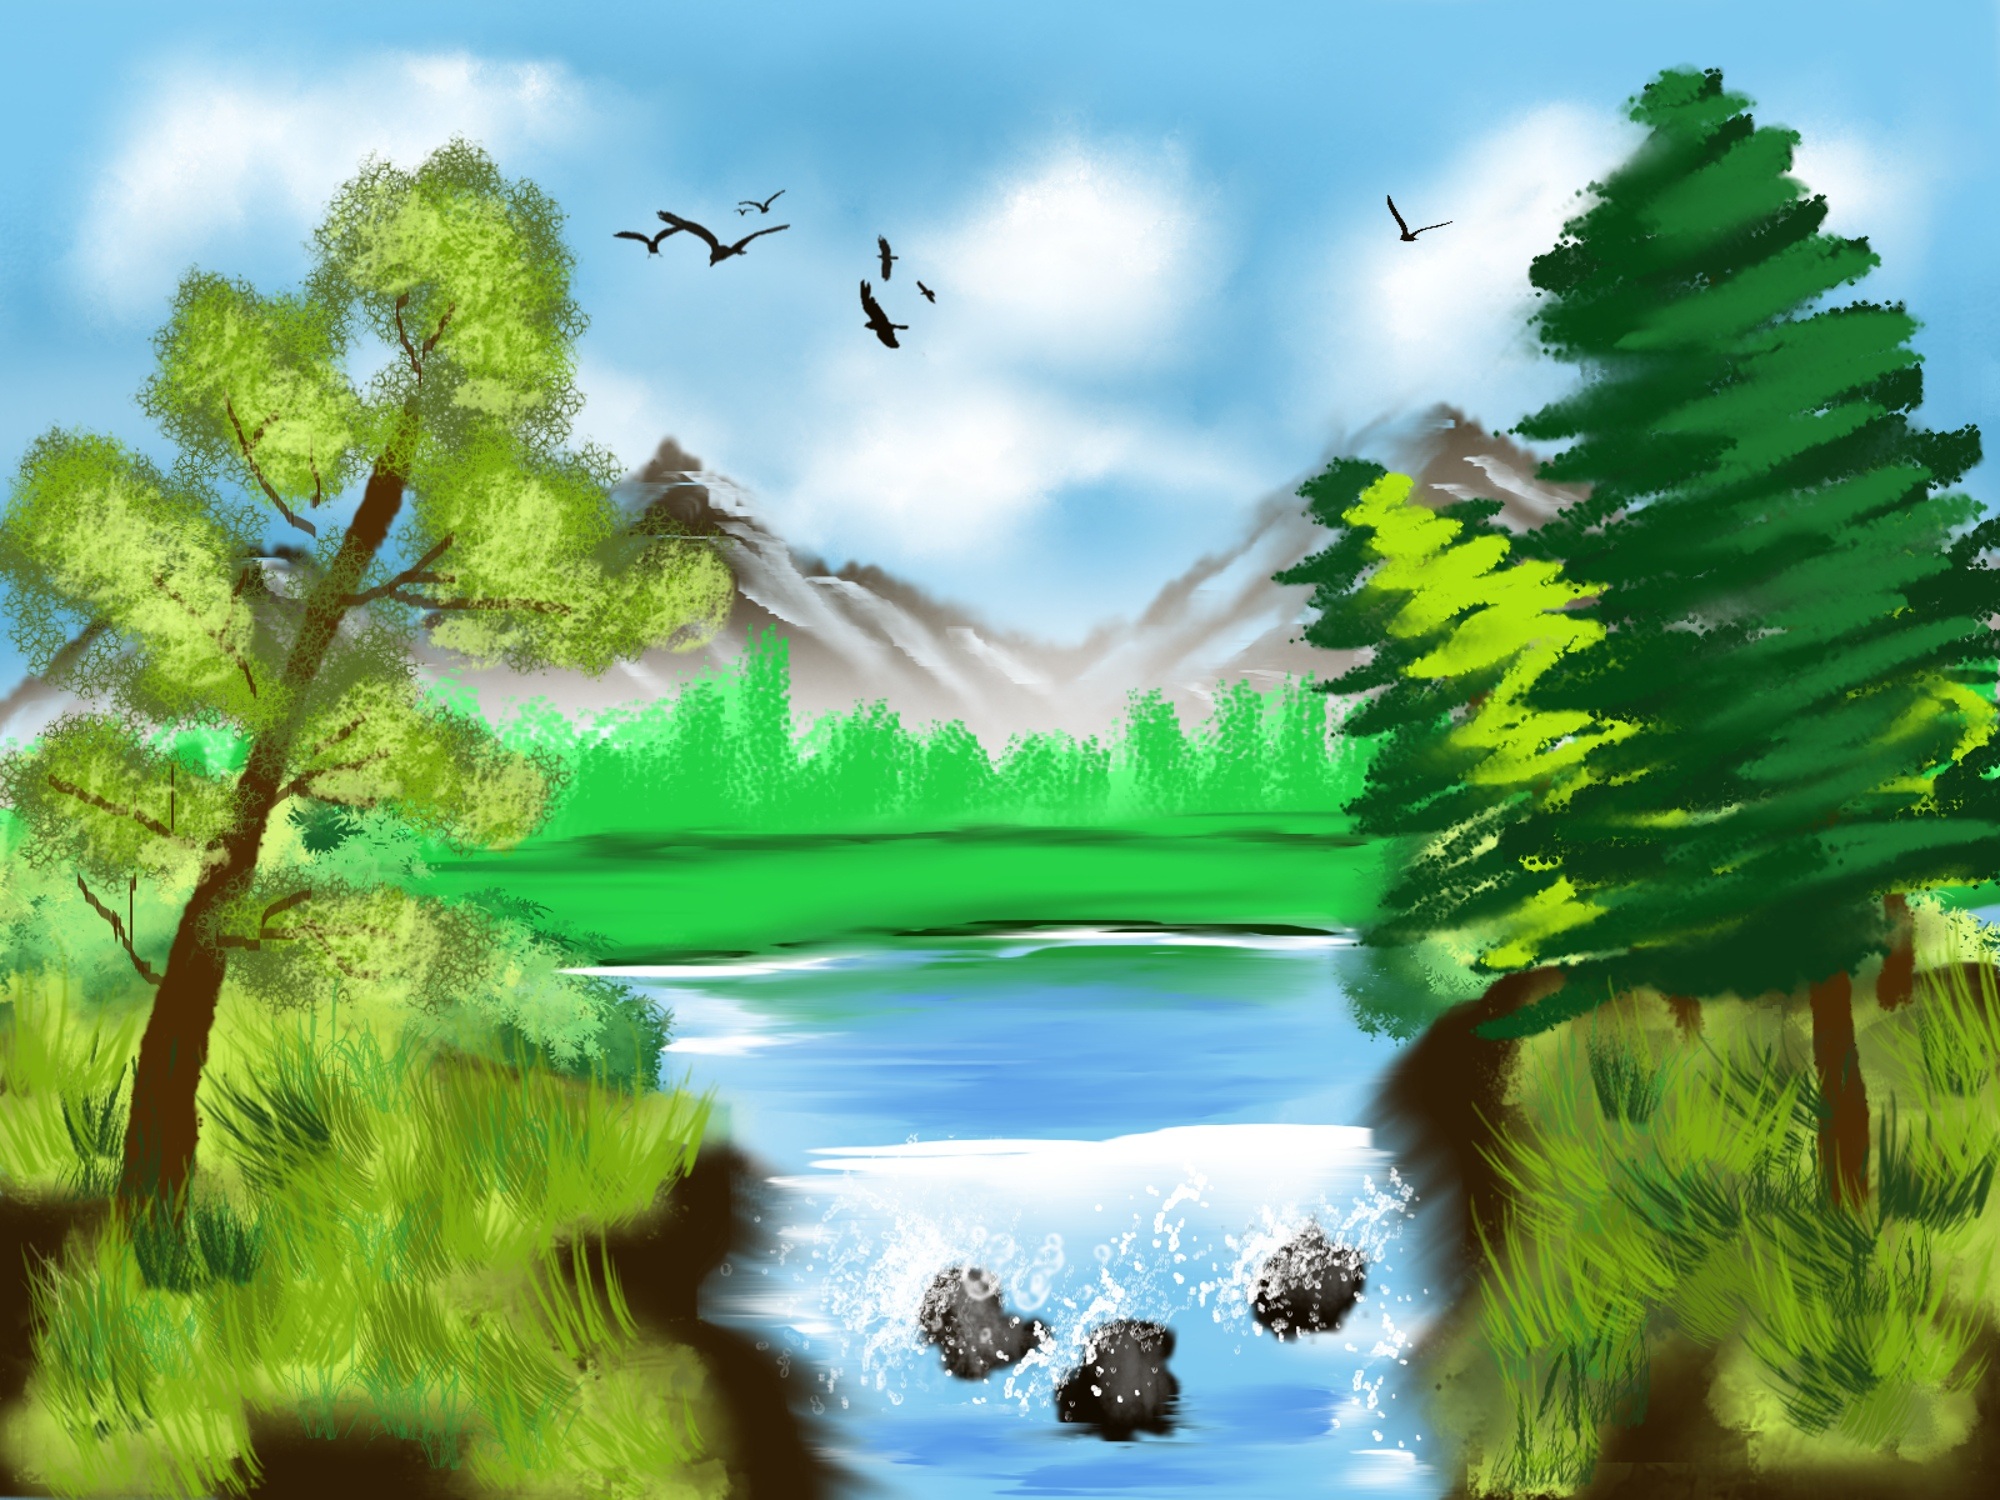 How To Draw A River Scenery Very Easy |Drawing River Scenery Step By Step -  YouTube